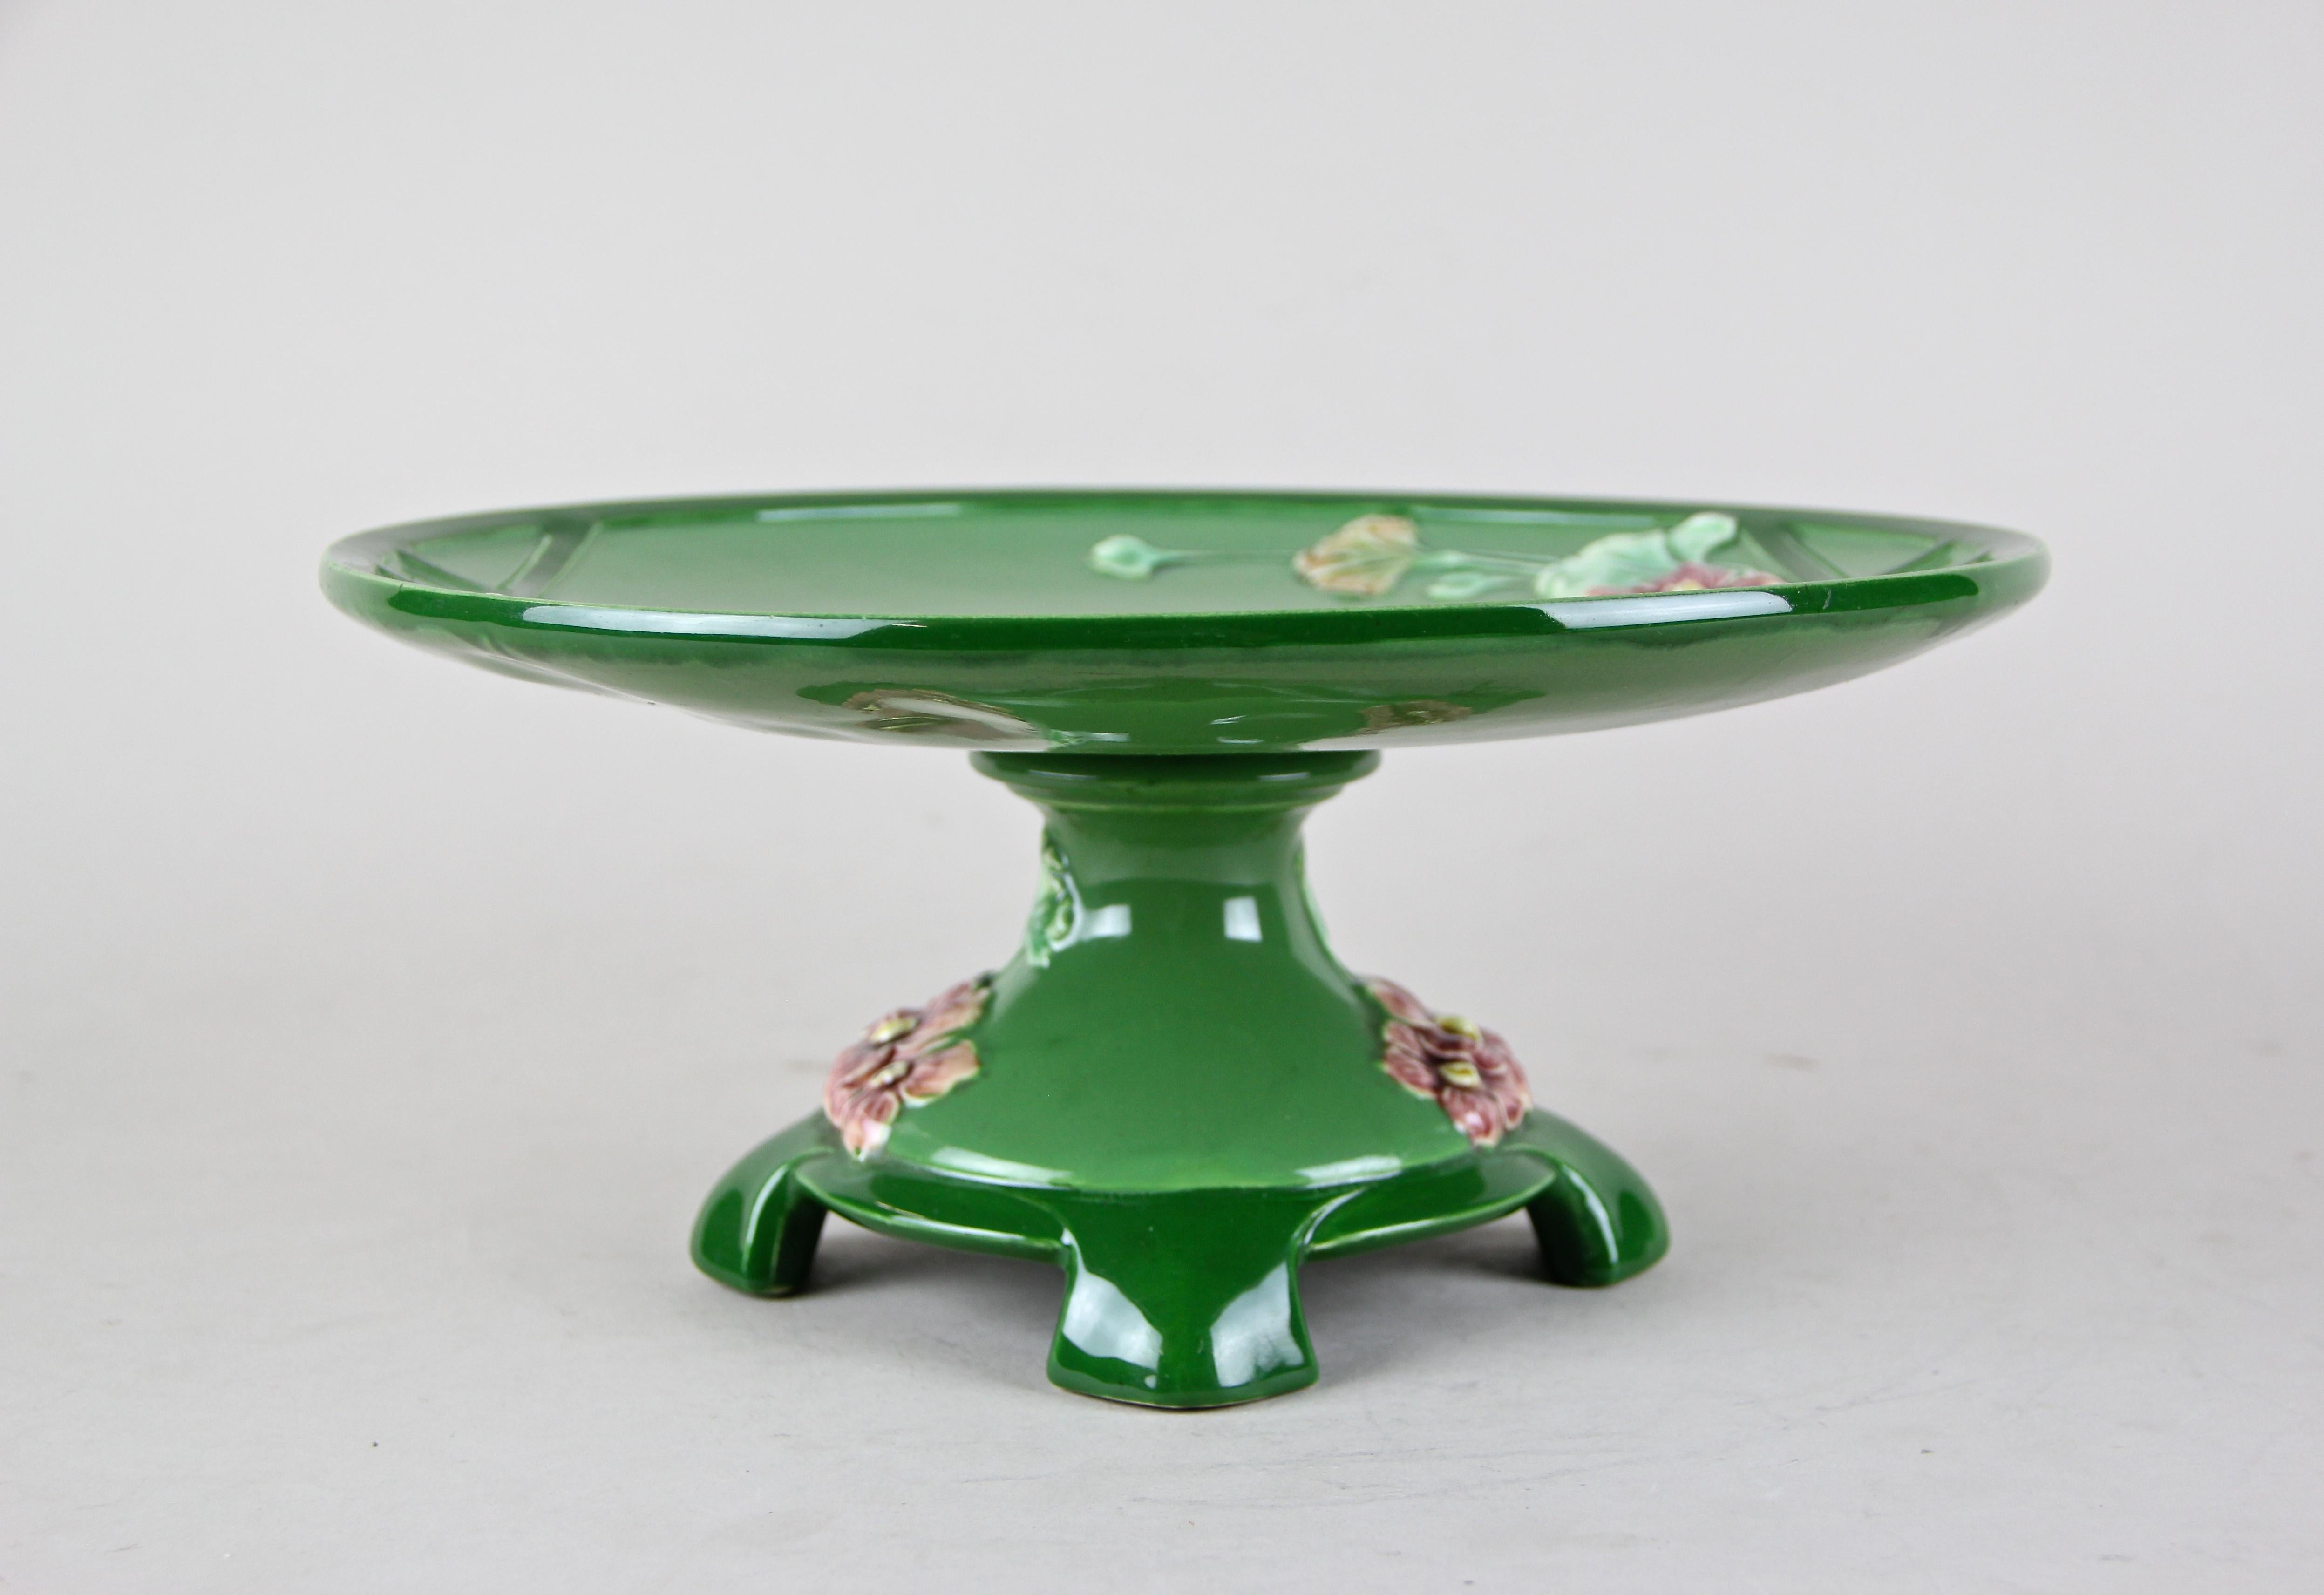 Another fine Art Nouveau centerpiece from the famous Majolica manufactory Eichwald circa 1910. The very own style of the coloration in green shades is typical for Eichwald. A round plate adorned by lovely blossoms sits on a nice shaped base with the